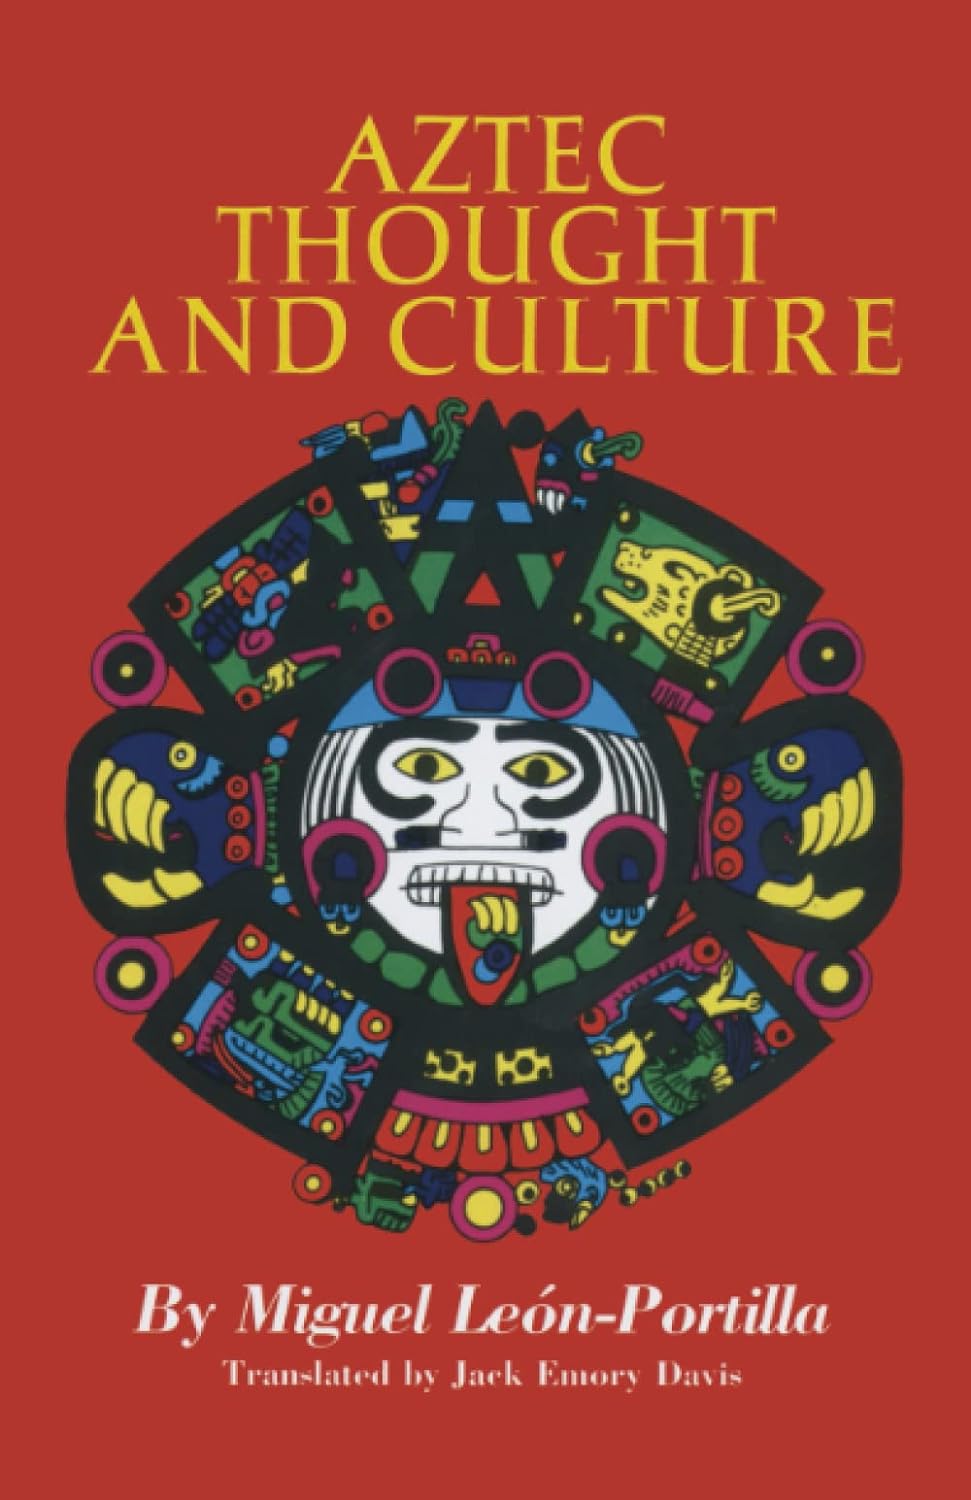 books about the aztecs9